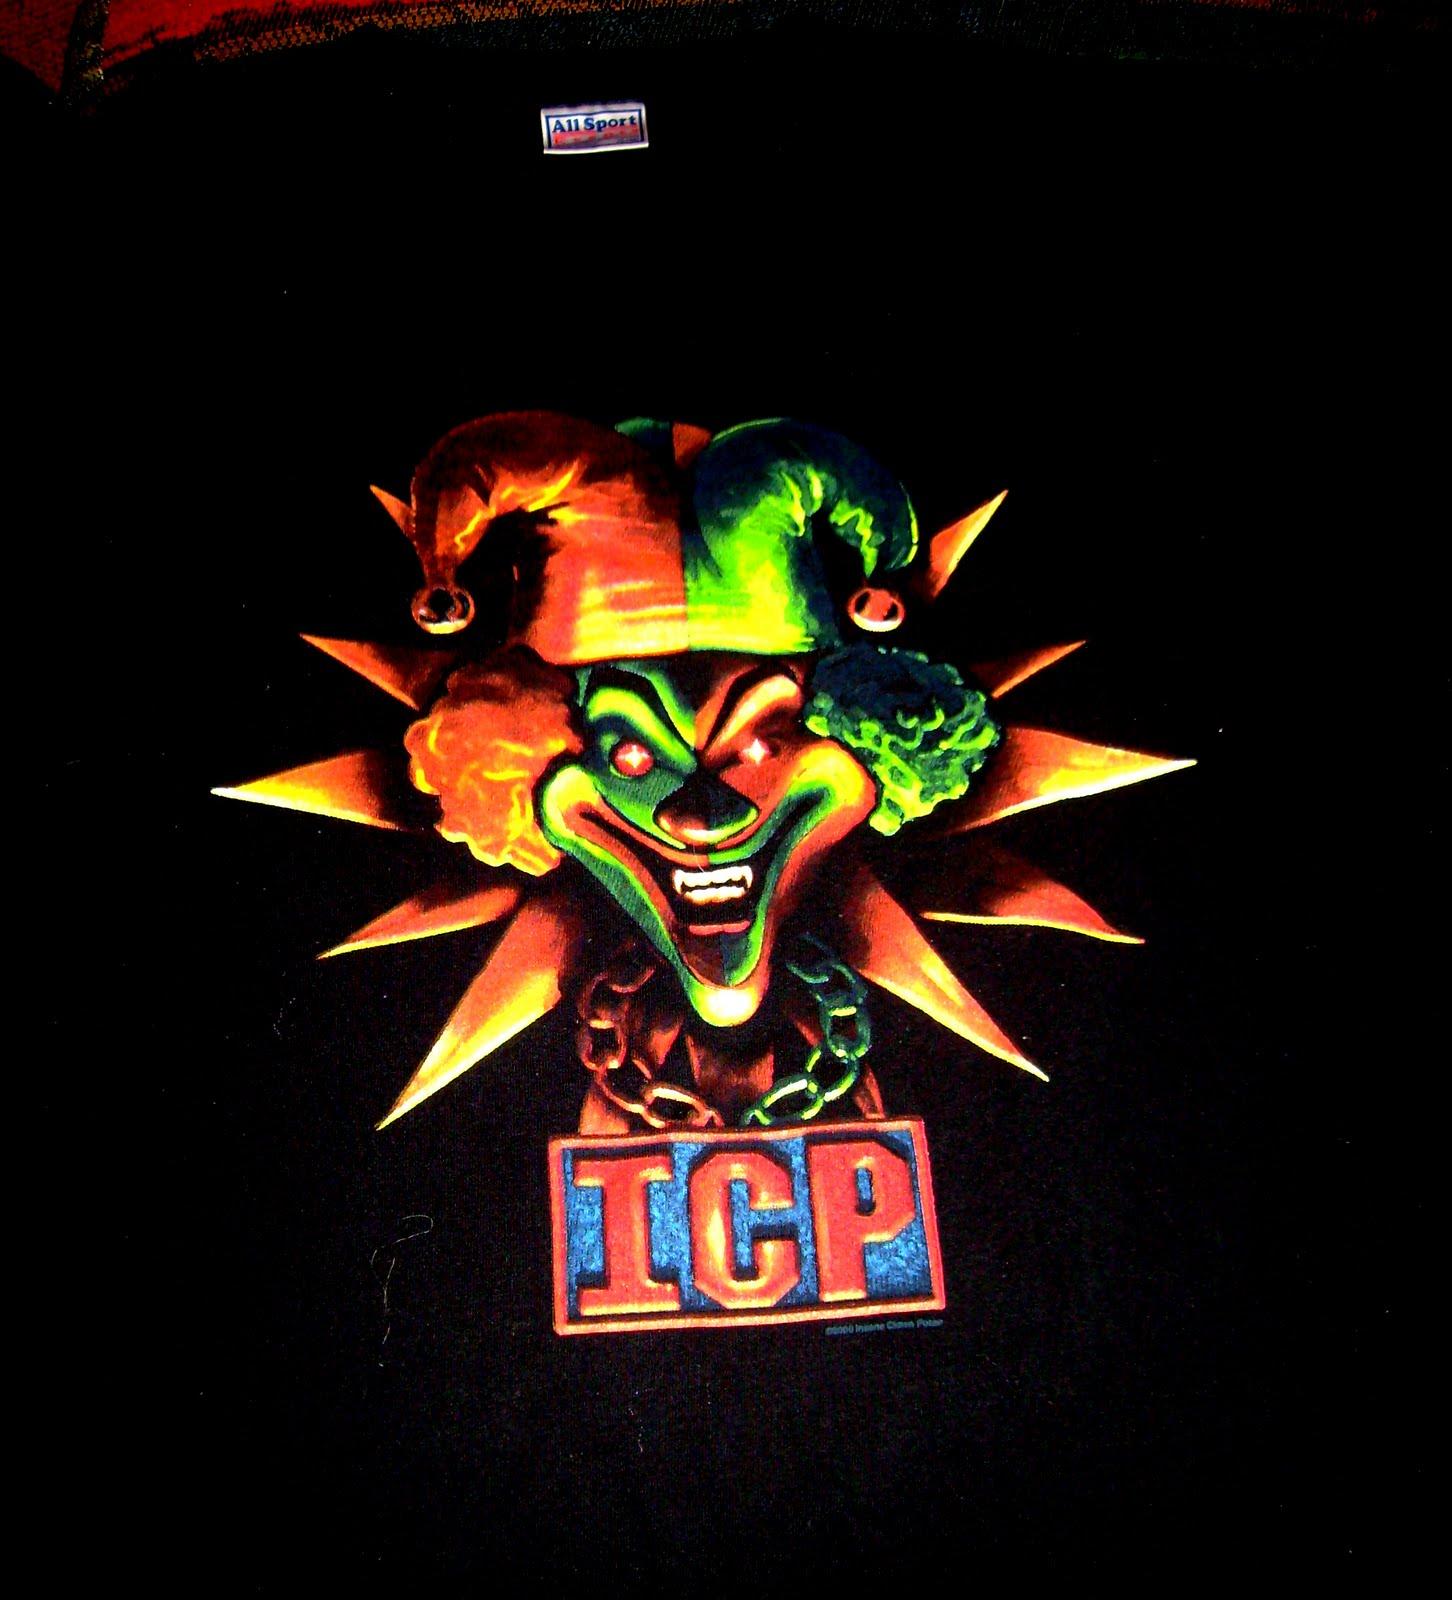 Free Insane Clown Posse ICP WallPaper Digital Download  Other   Listiacom Auctions for Free Stuff